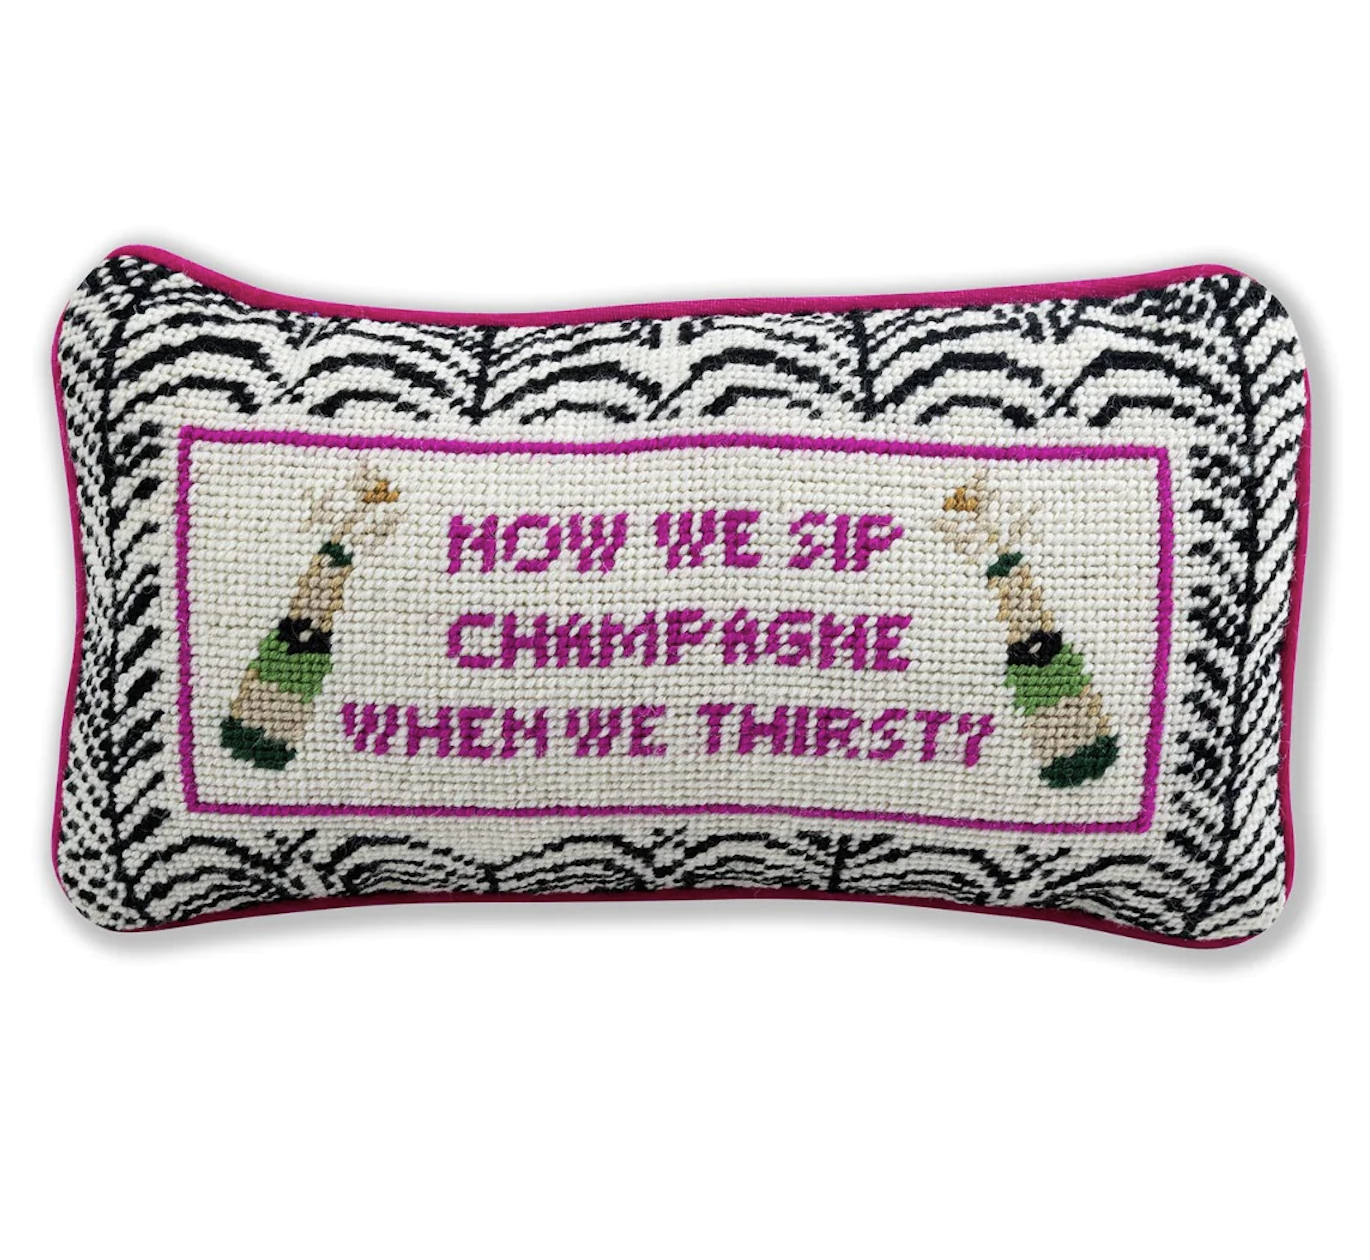 CHAMPAGNE NEEDLEPOINT PILLOW